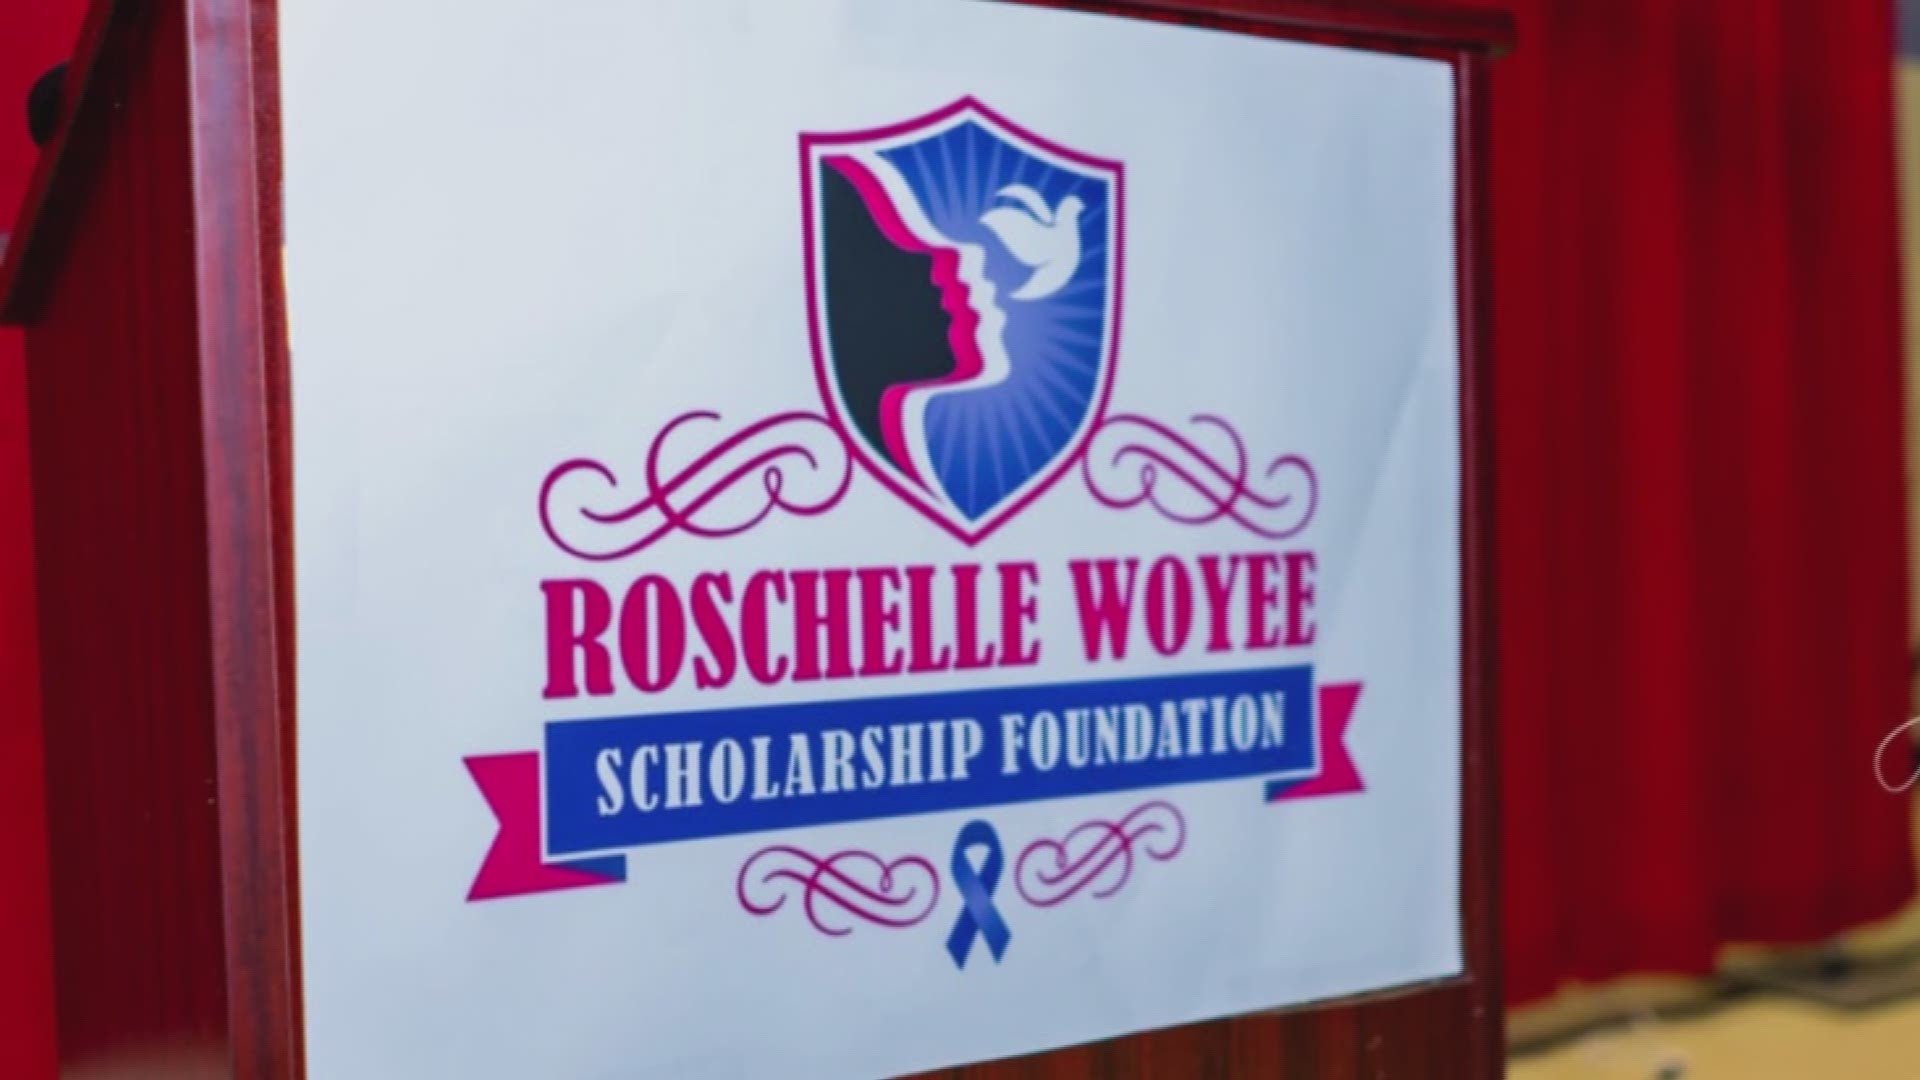 The Rochelle Woyee Scholarship Fund strives to bring a brighter future to those affected by domestic abuse